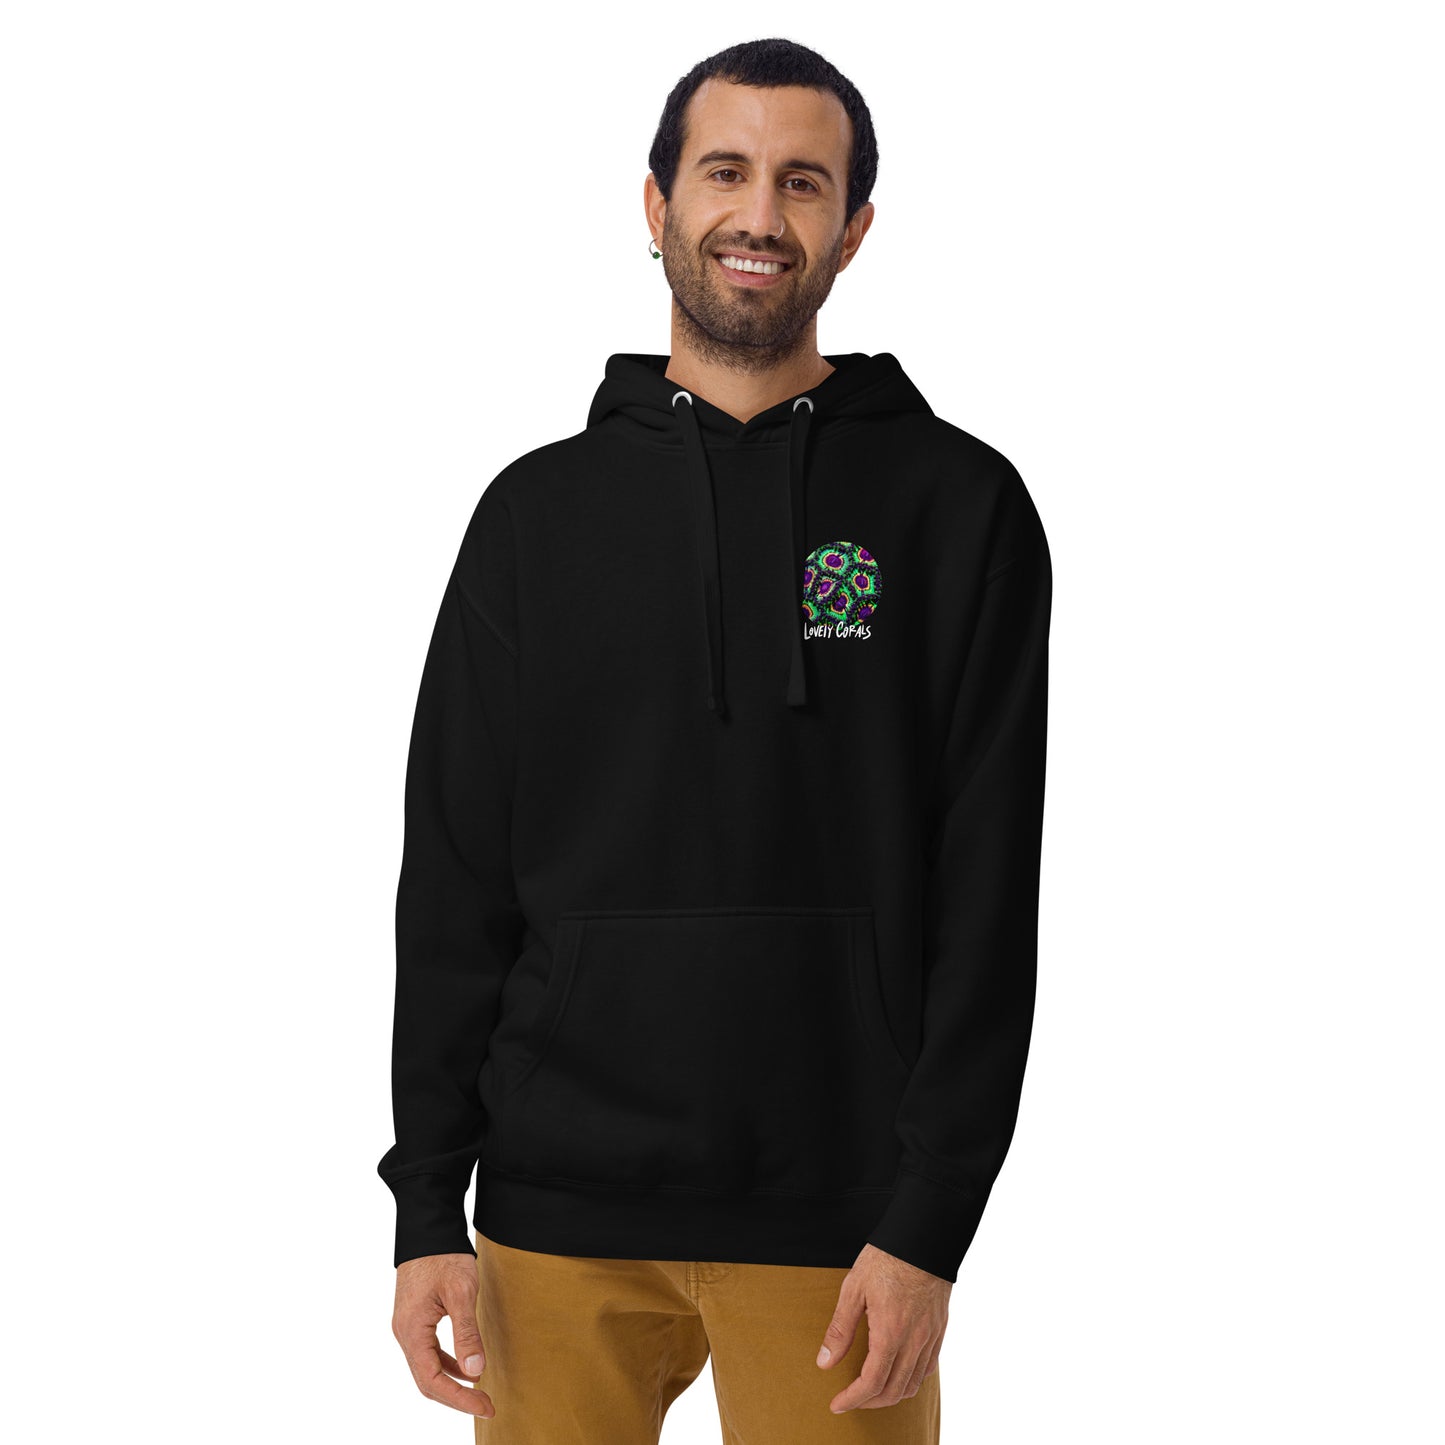 We See You – NFT Official Hoodie | LovelyCorals